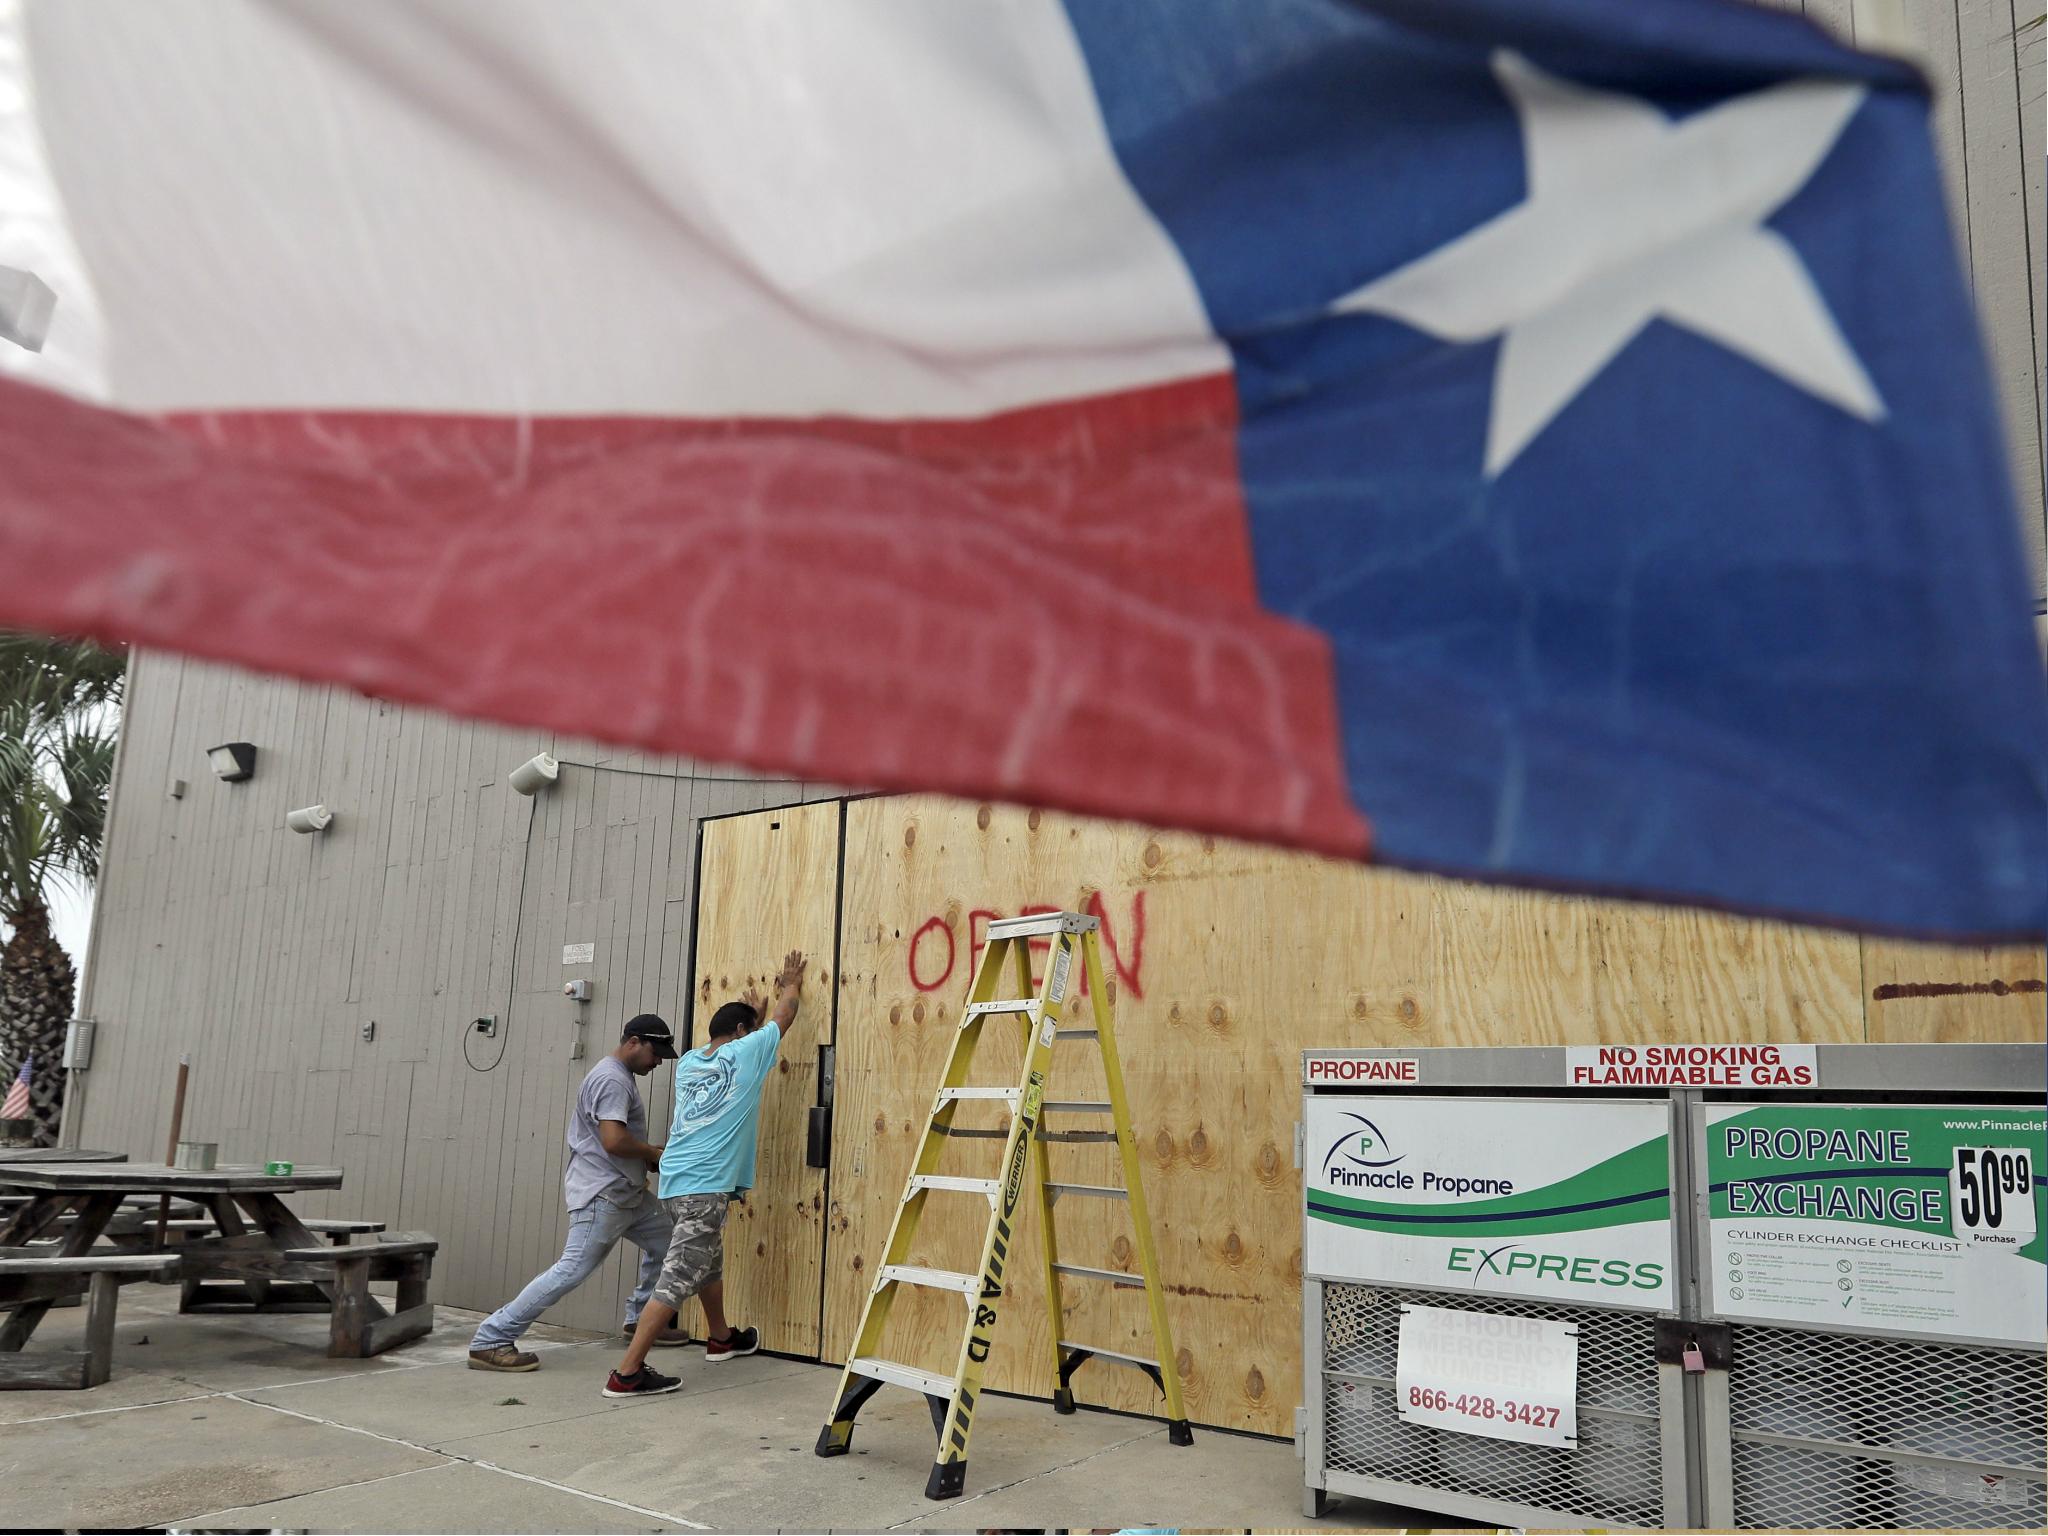 Ramon Lopez, left, and Arturo Villarreal board up windows of a business in Galveston, Texas as Hurricane Harvey intensifies in the Gulf of Mexico